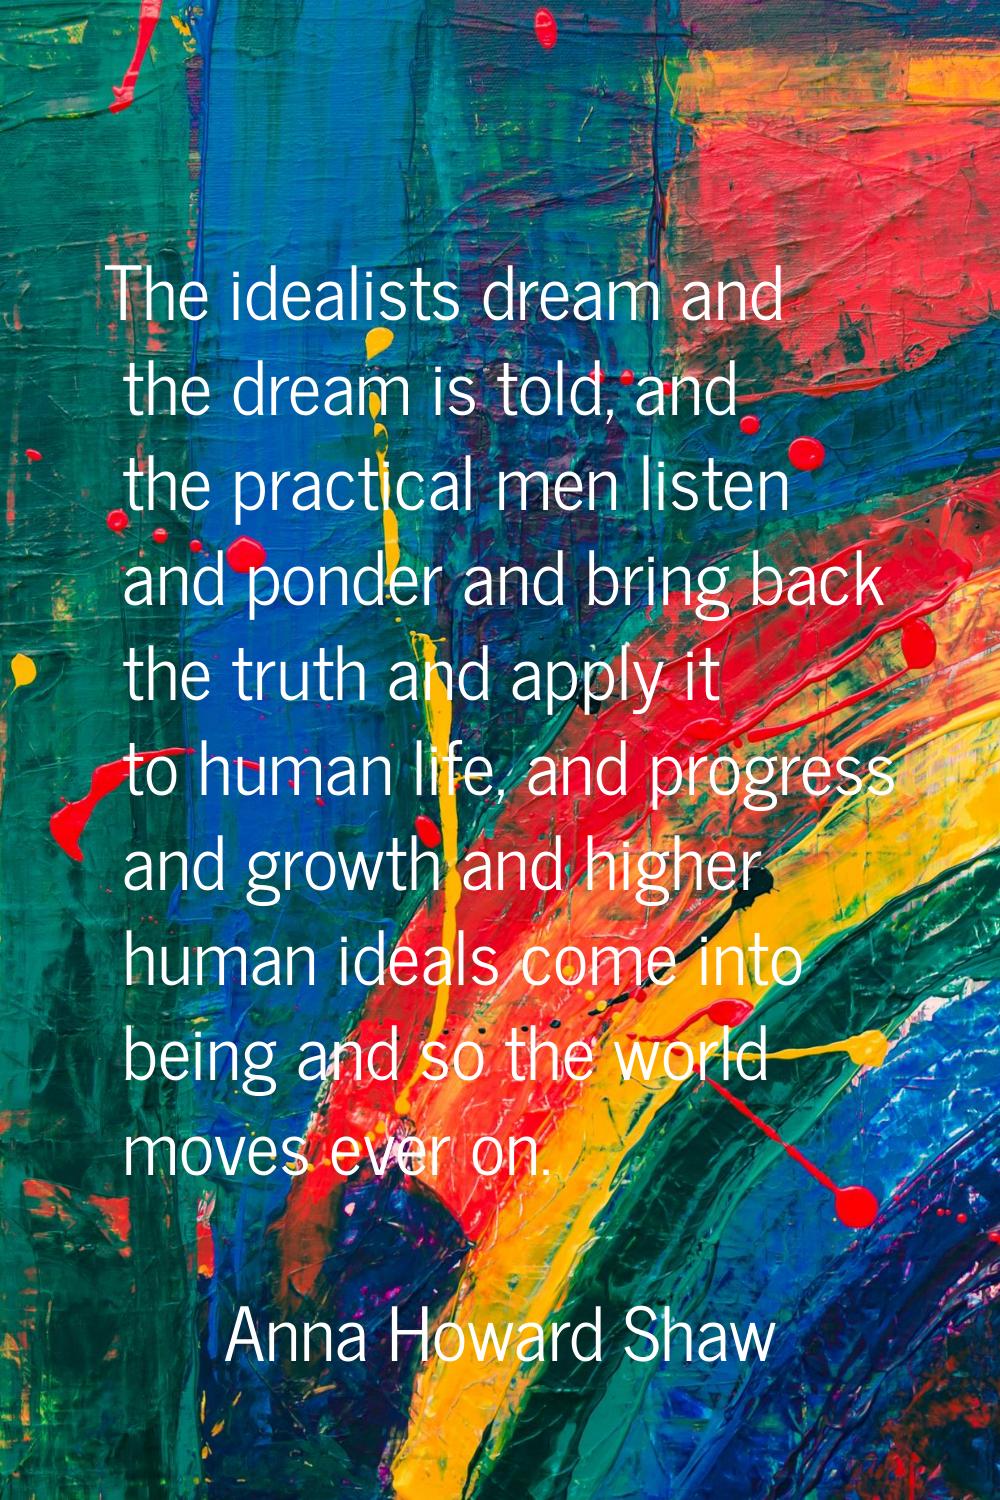 The idealists dream and the dream is told, and the practical men listen and ponder and bring back t